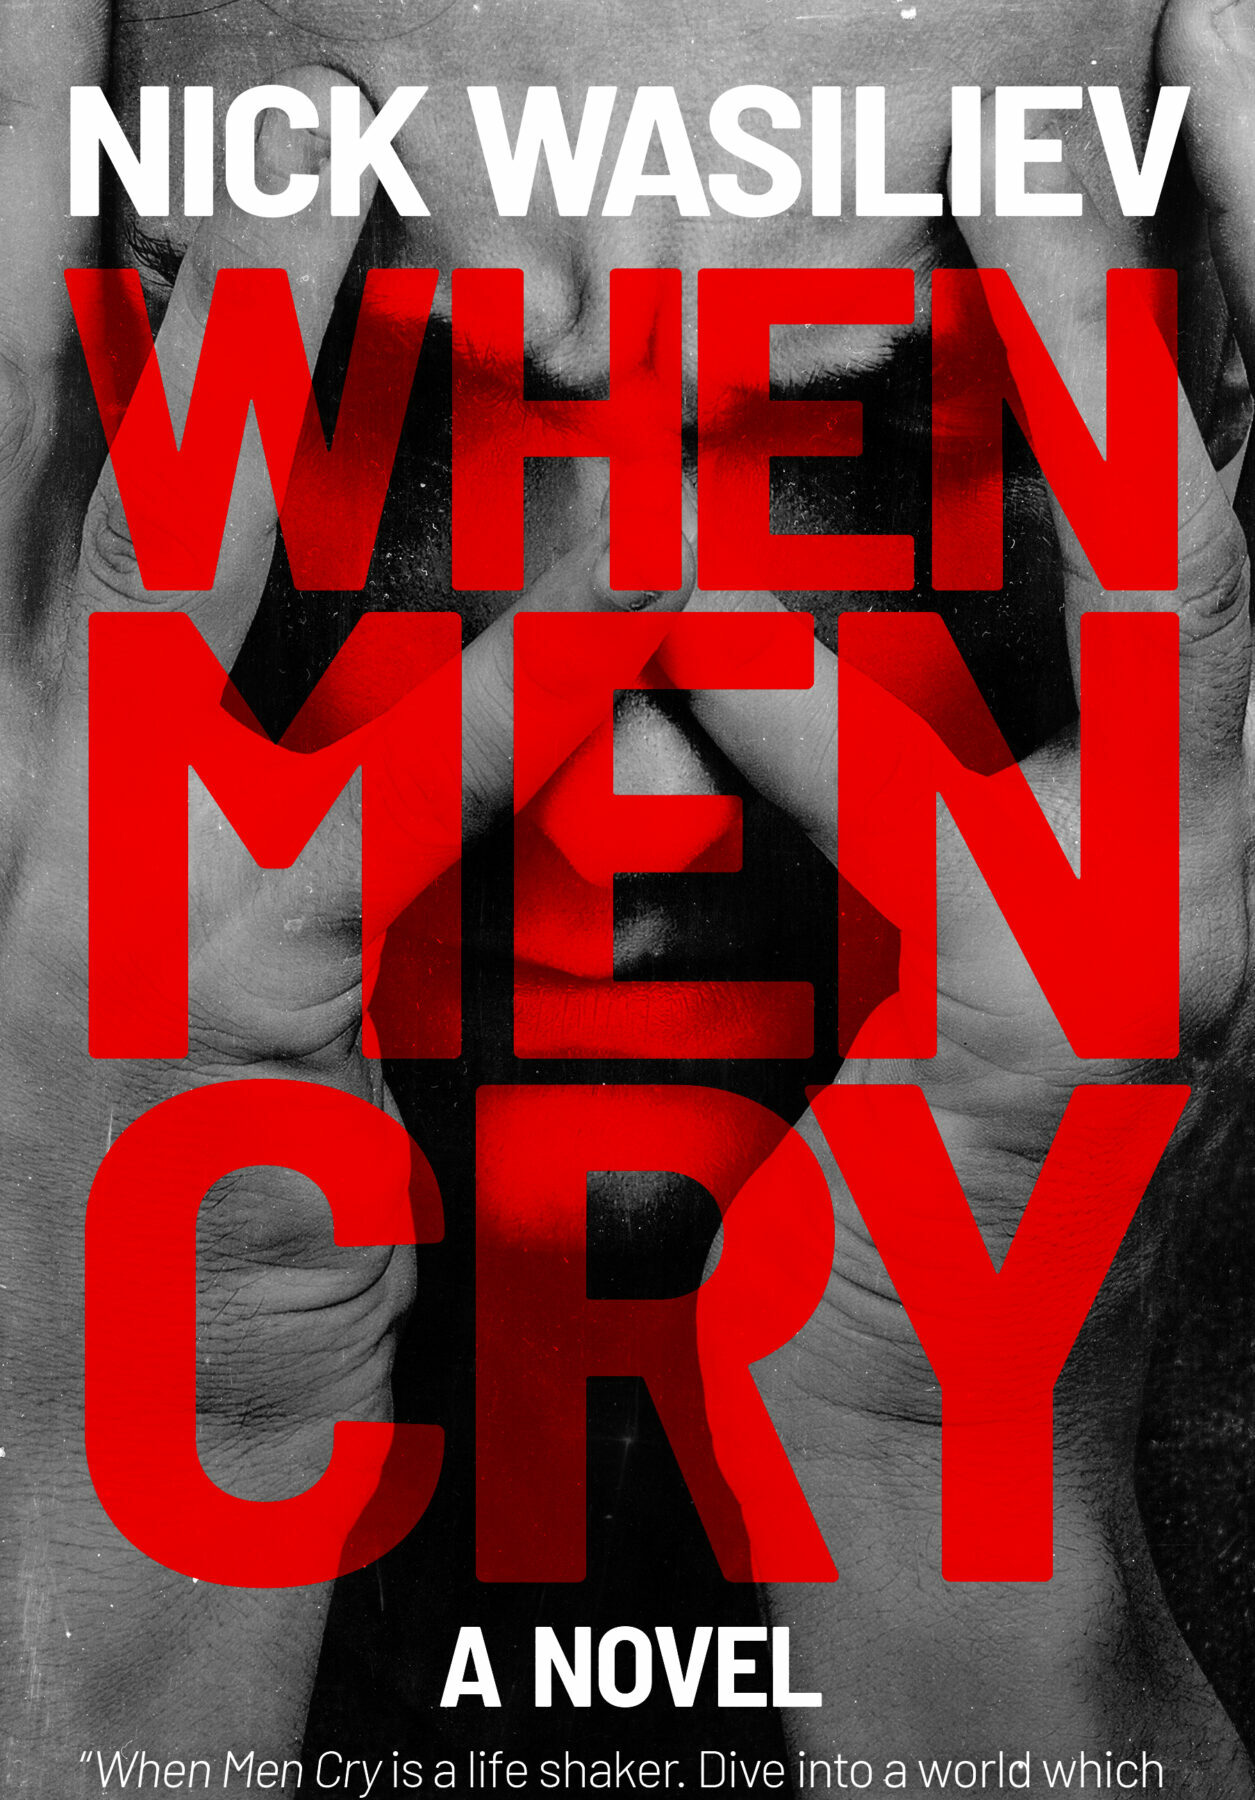 A book cover featuring a black and white close-up of a man holding his hands over his face in anguish, and the title overlaid at partial transparency in red letters that fill most of the page